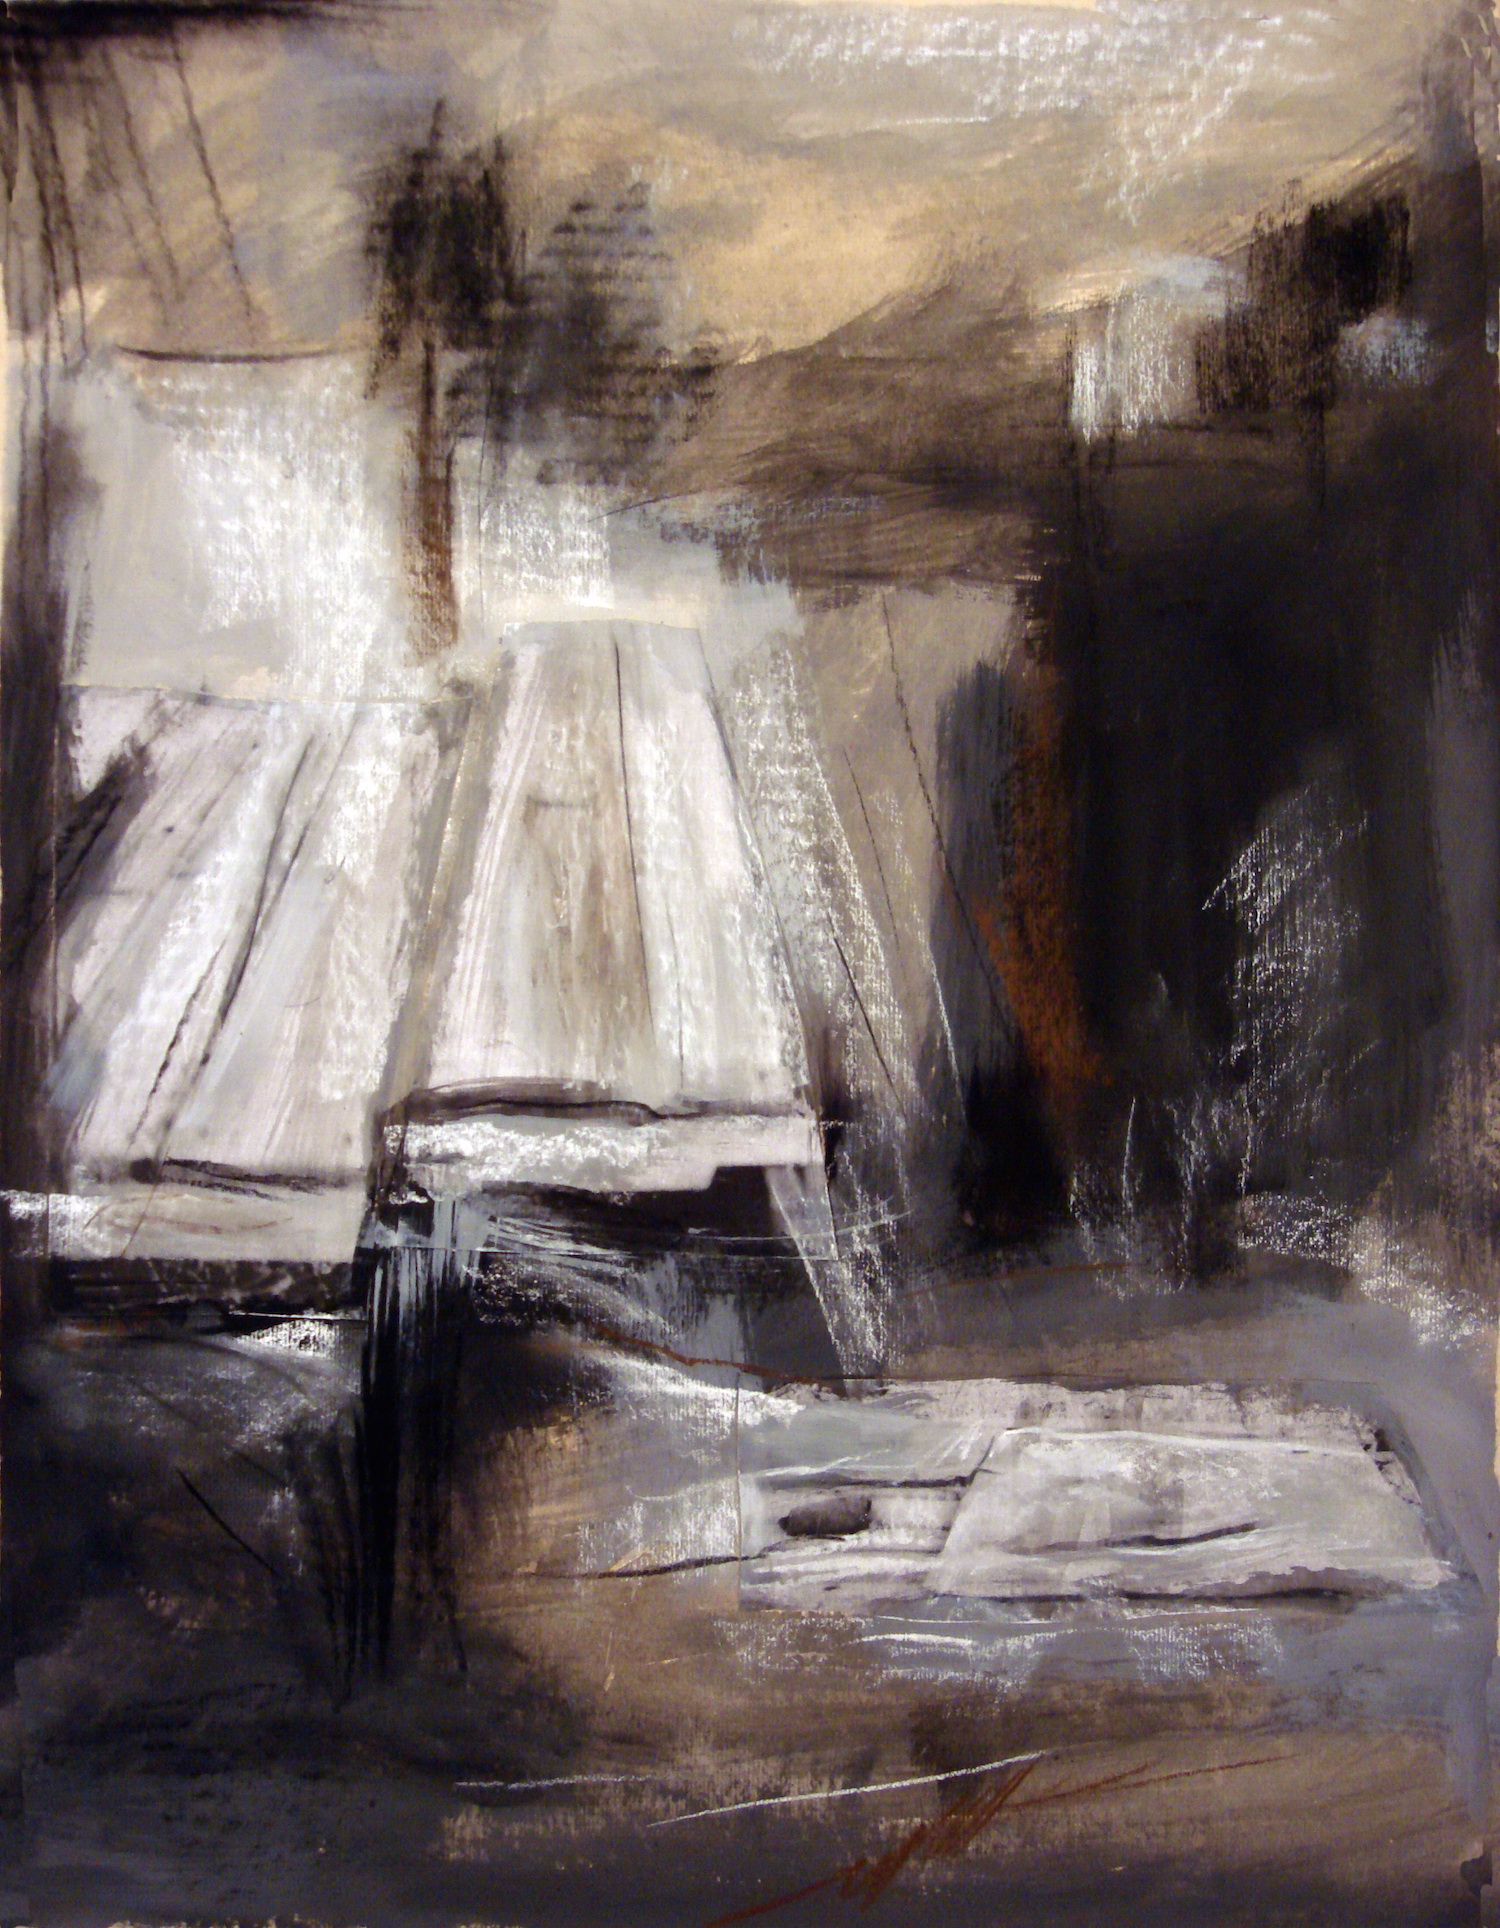 The Light #89, acrylic & pastel on paper, 39x31 inches, 2009